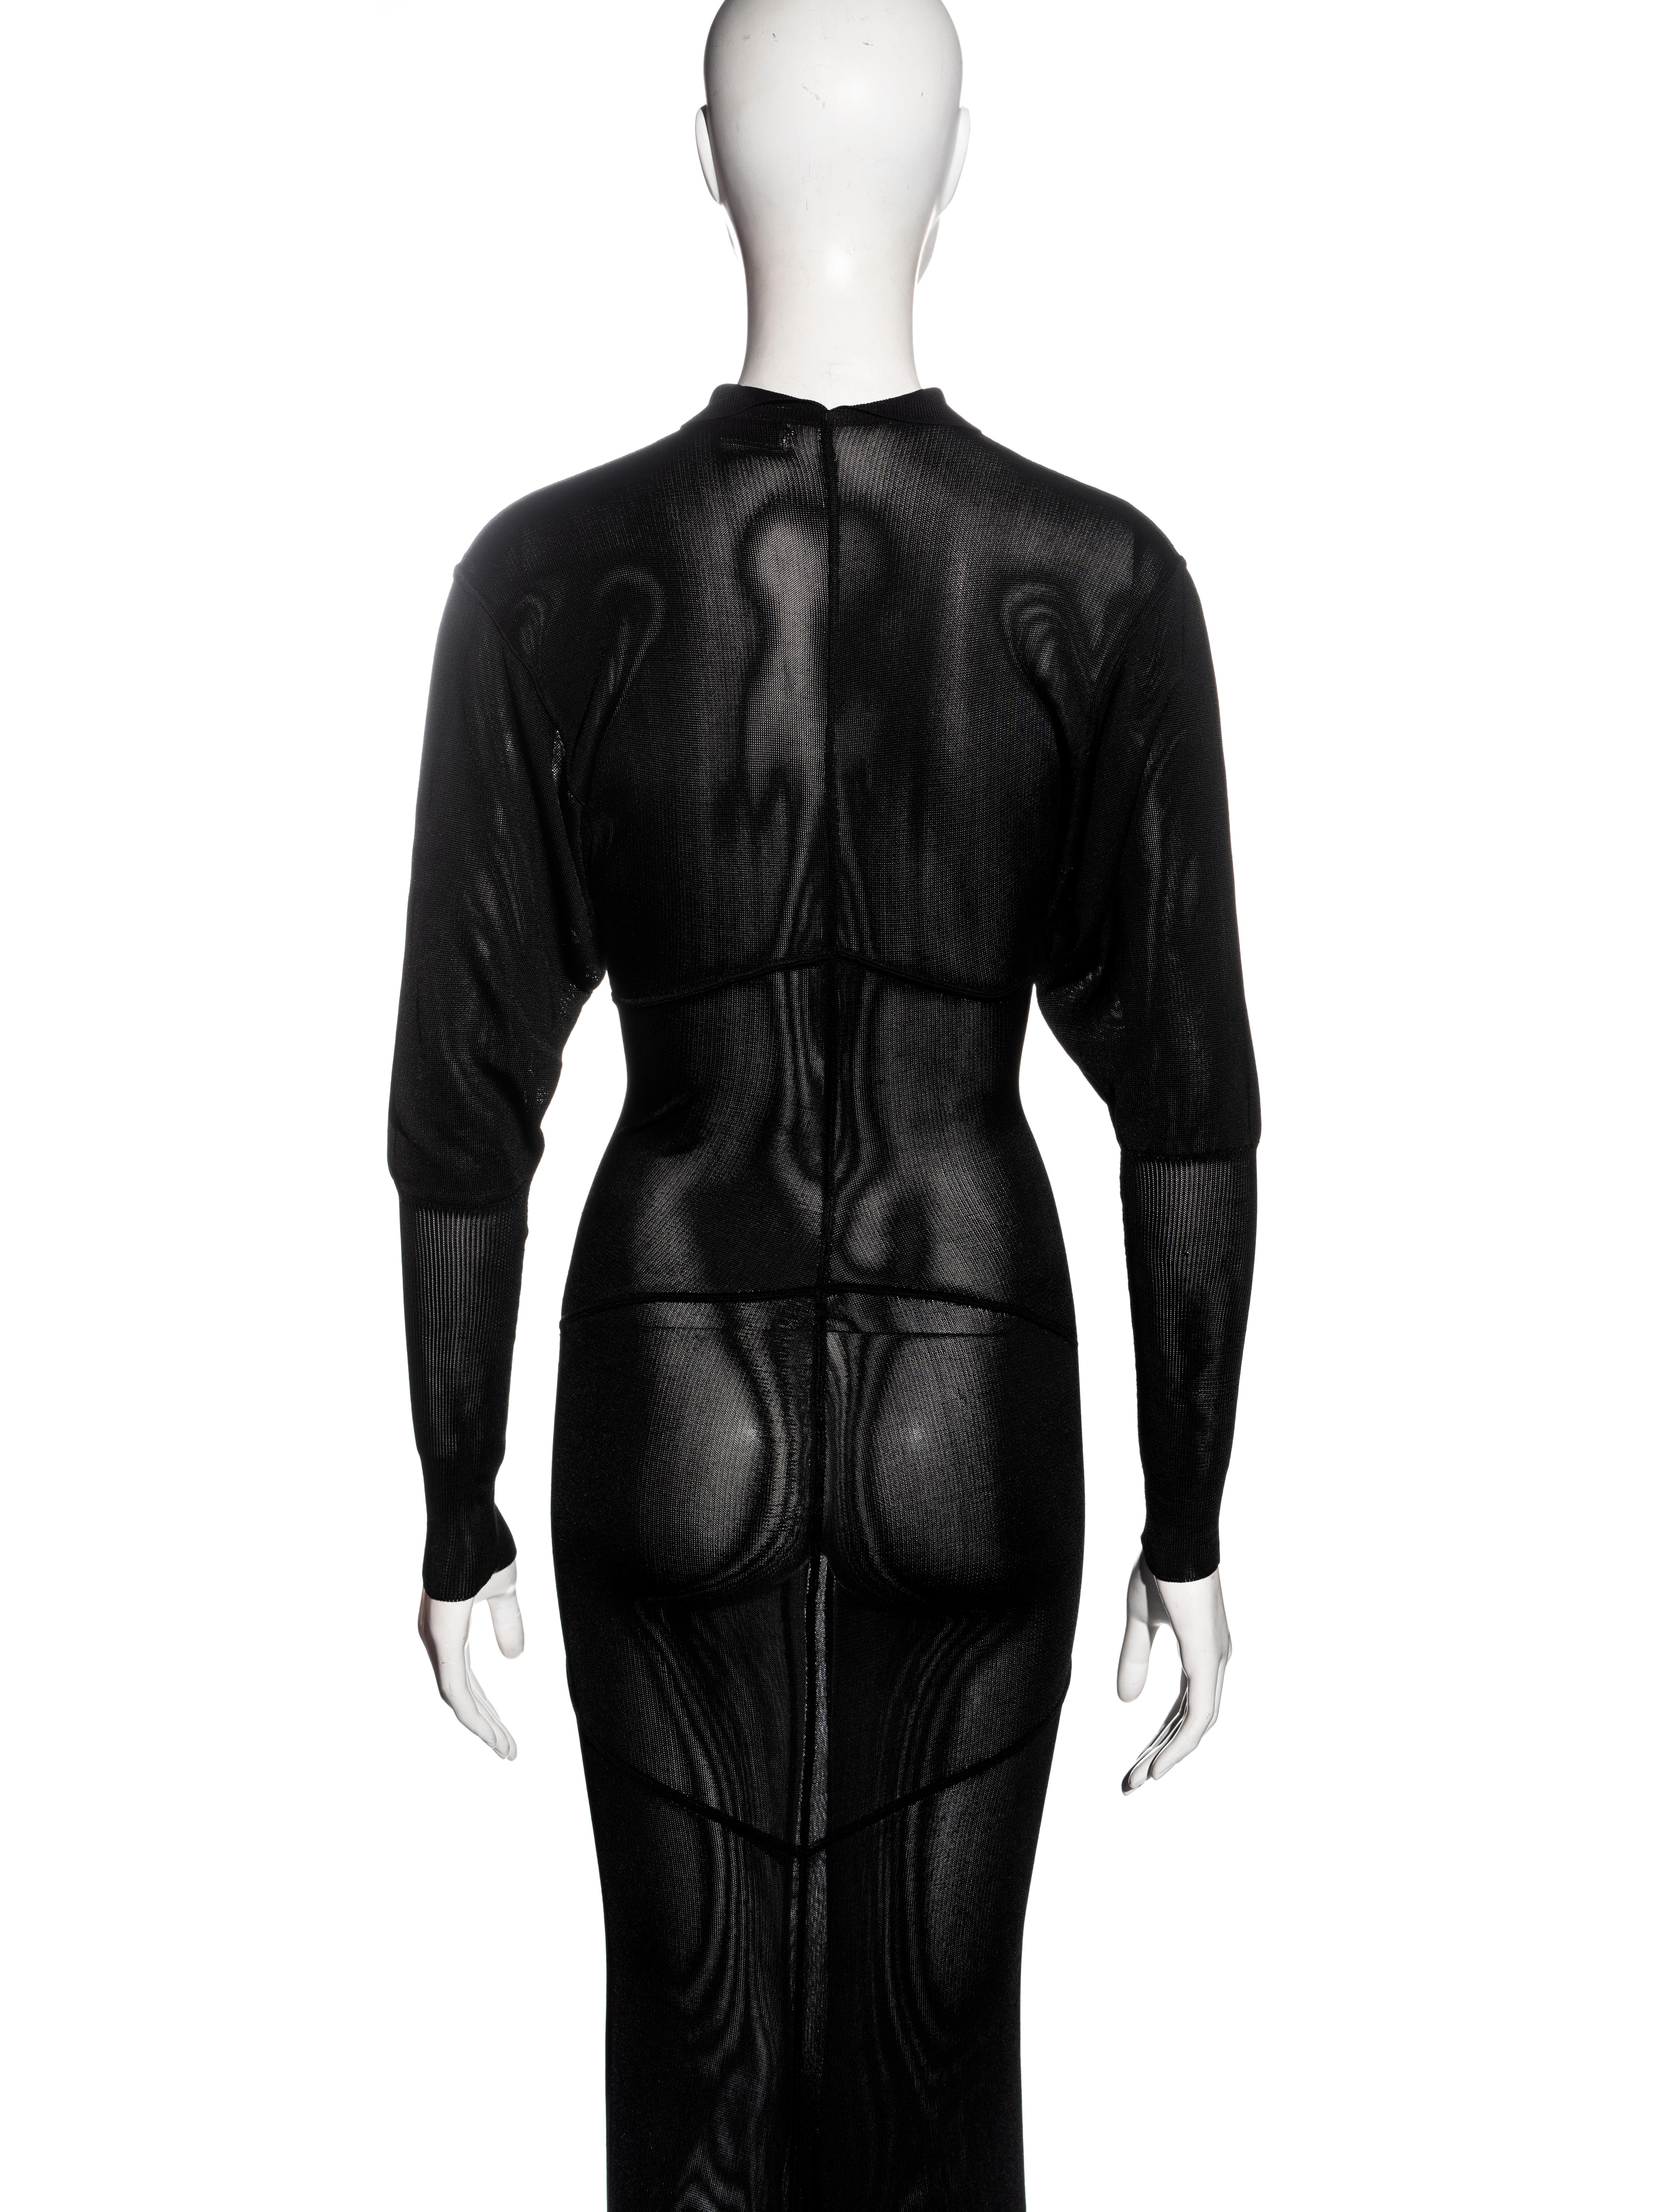 Azzedine Alaia black acetate knit evening dress with train, fw 1986 For Sale 2